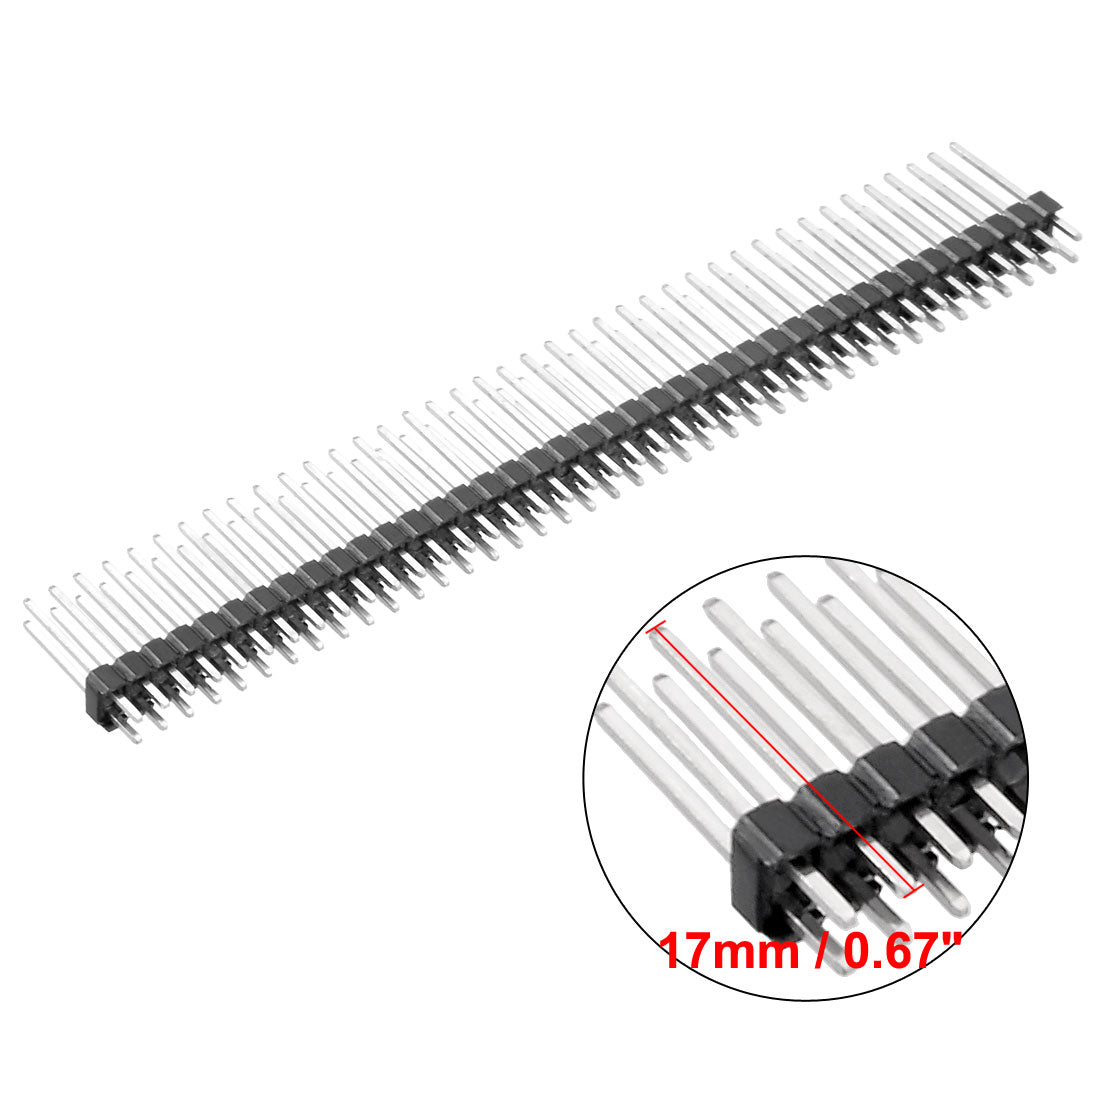 uxcell Uxcell 5Pcs 2.54mm Pitch 40-Pin 17mm Length Double Row Straight Connector Pin Header Strip for Arduino Prototype Shield